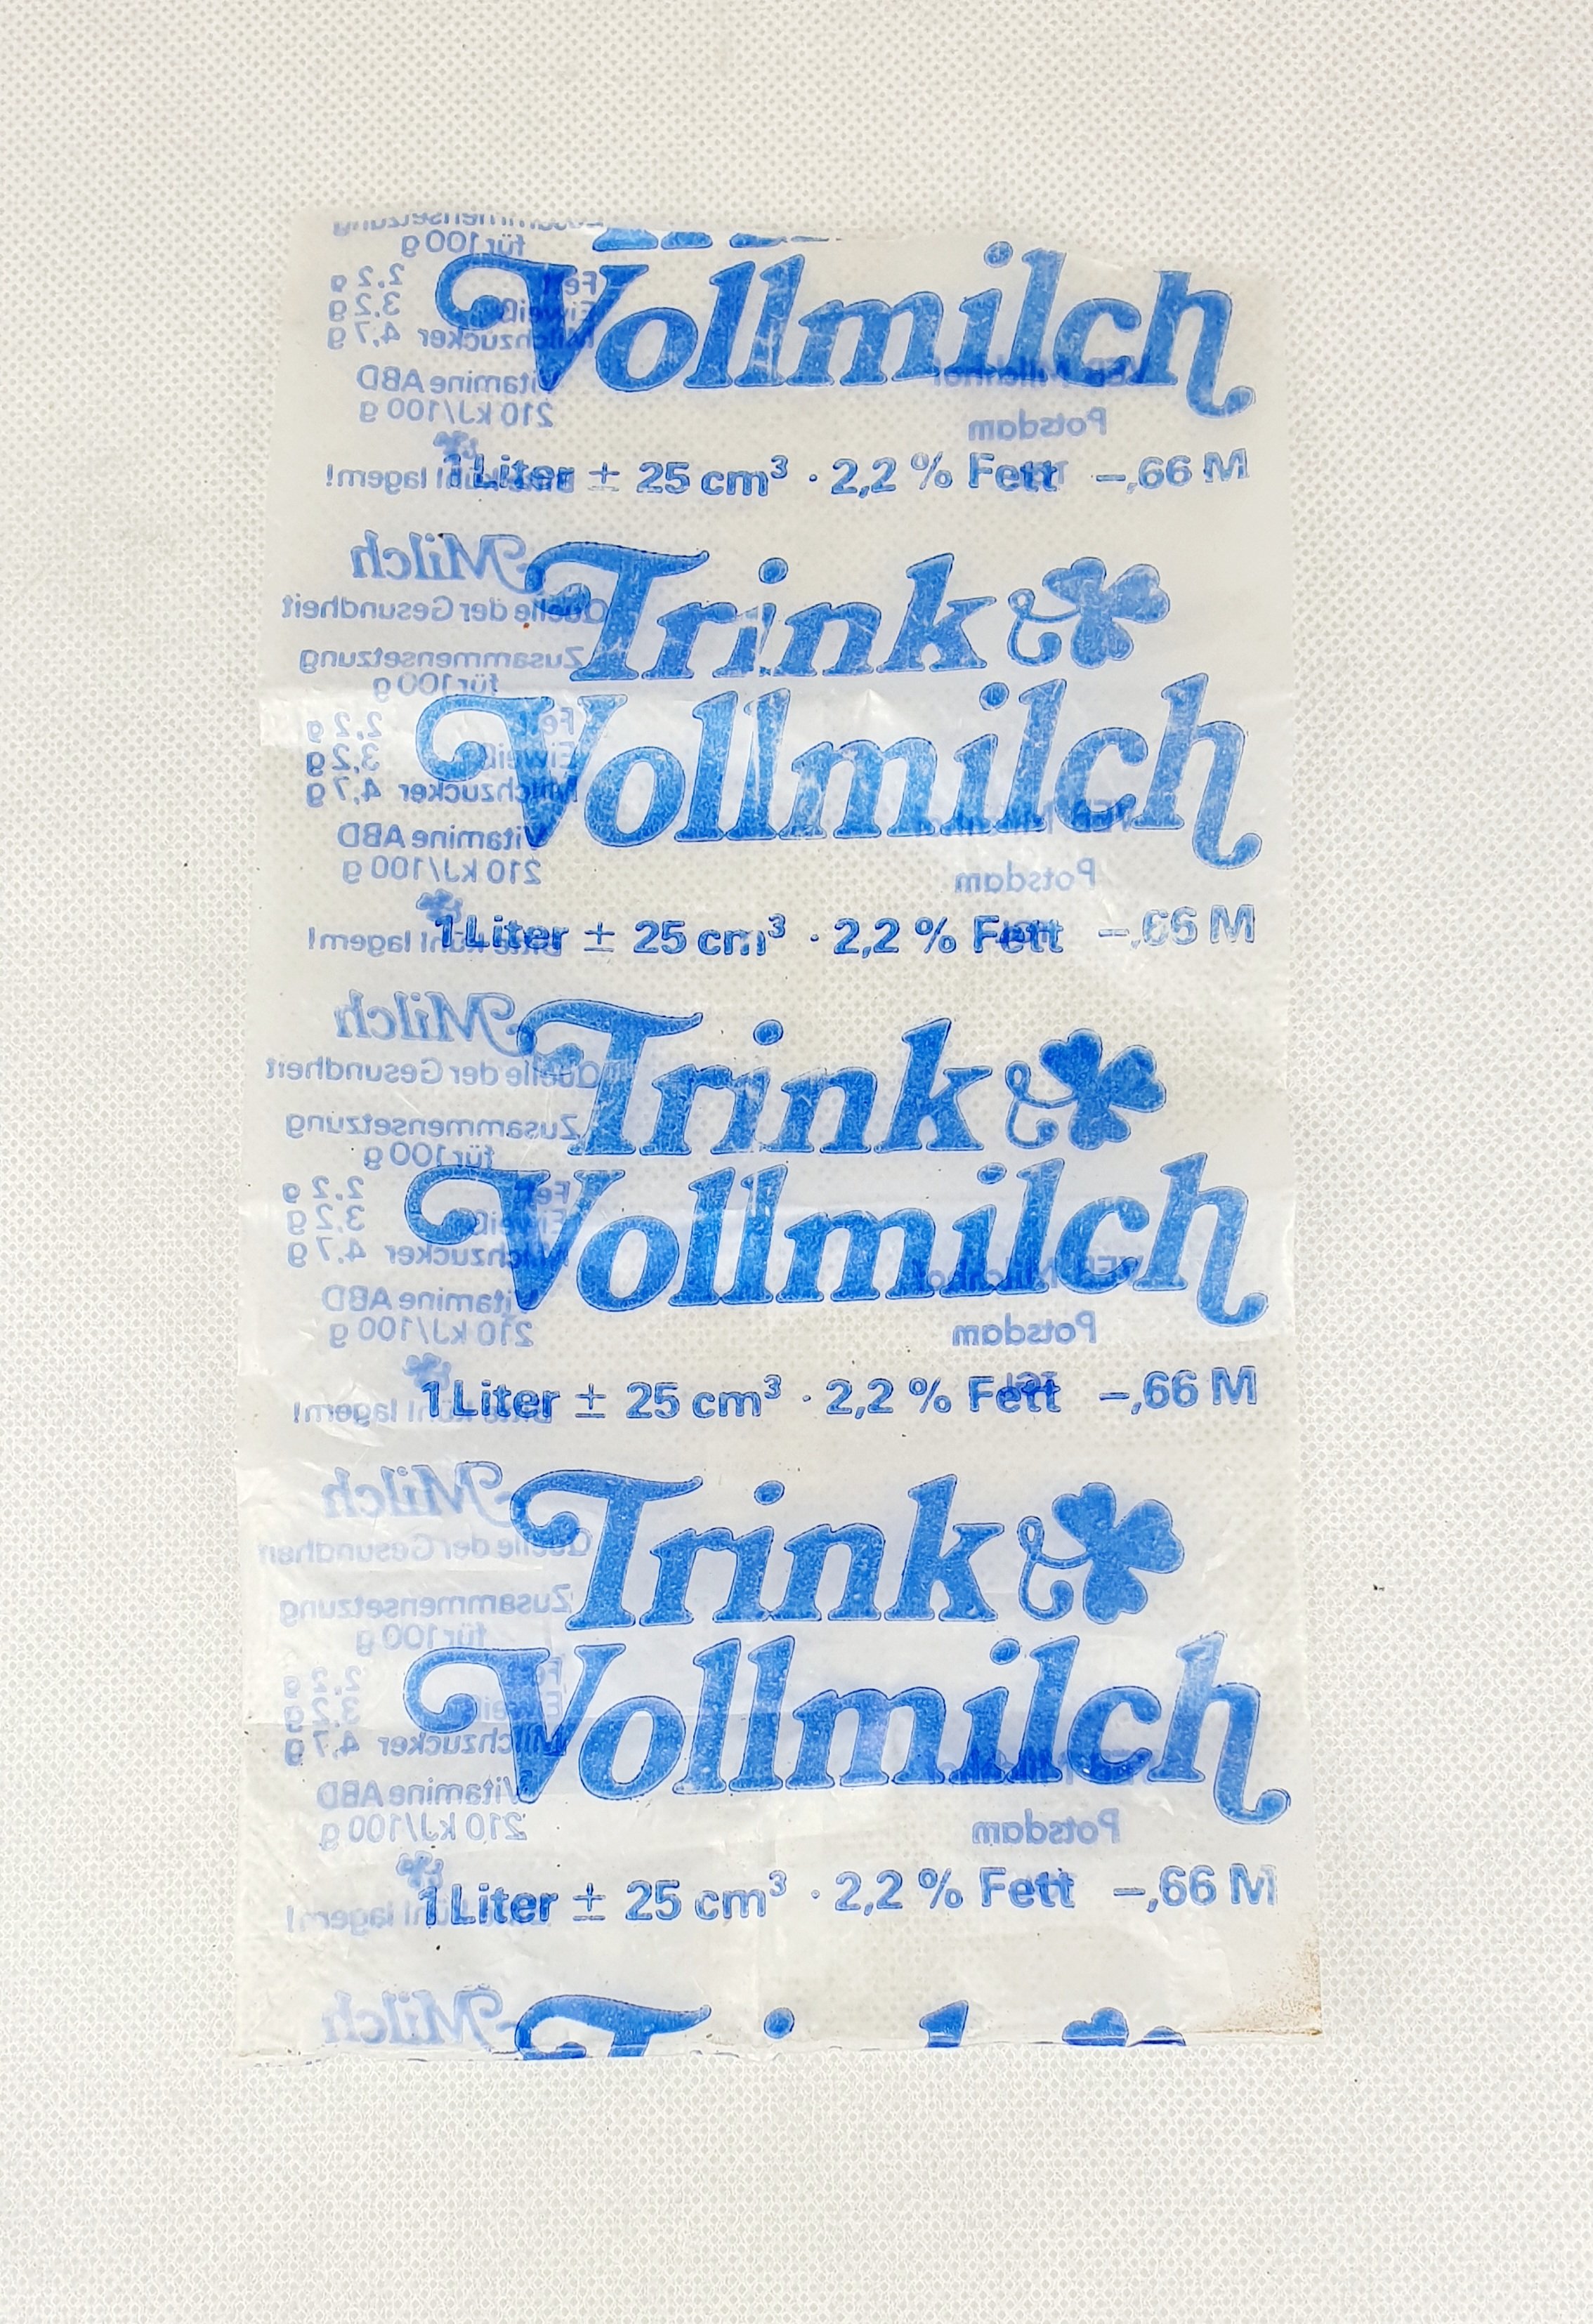 Trink-Vollmilch (Heimatmuseum Stadt Teltow CC BY-NC-SA)